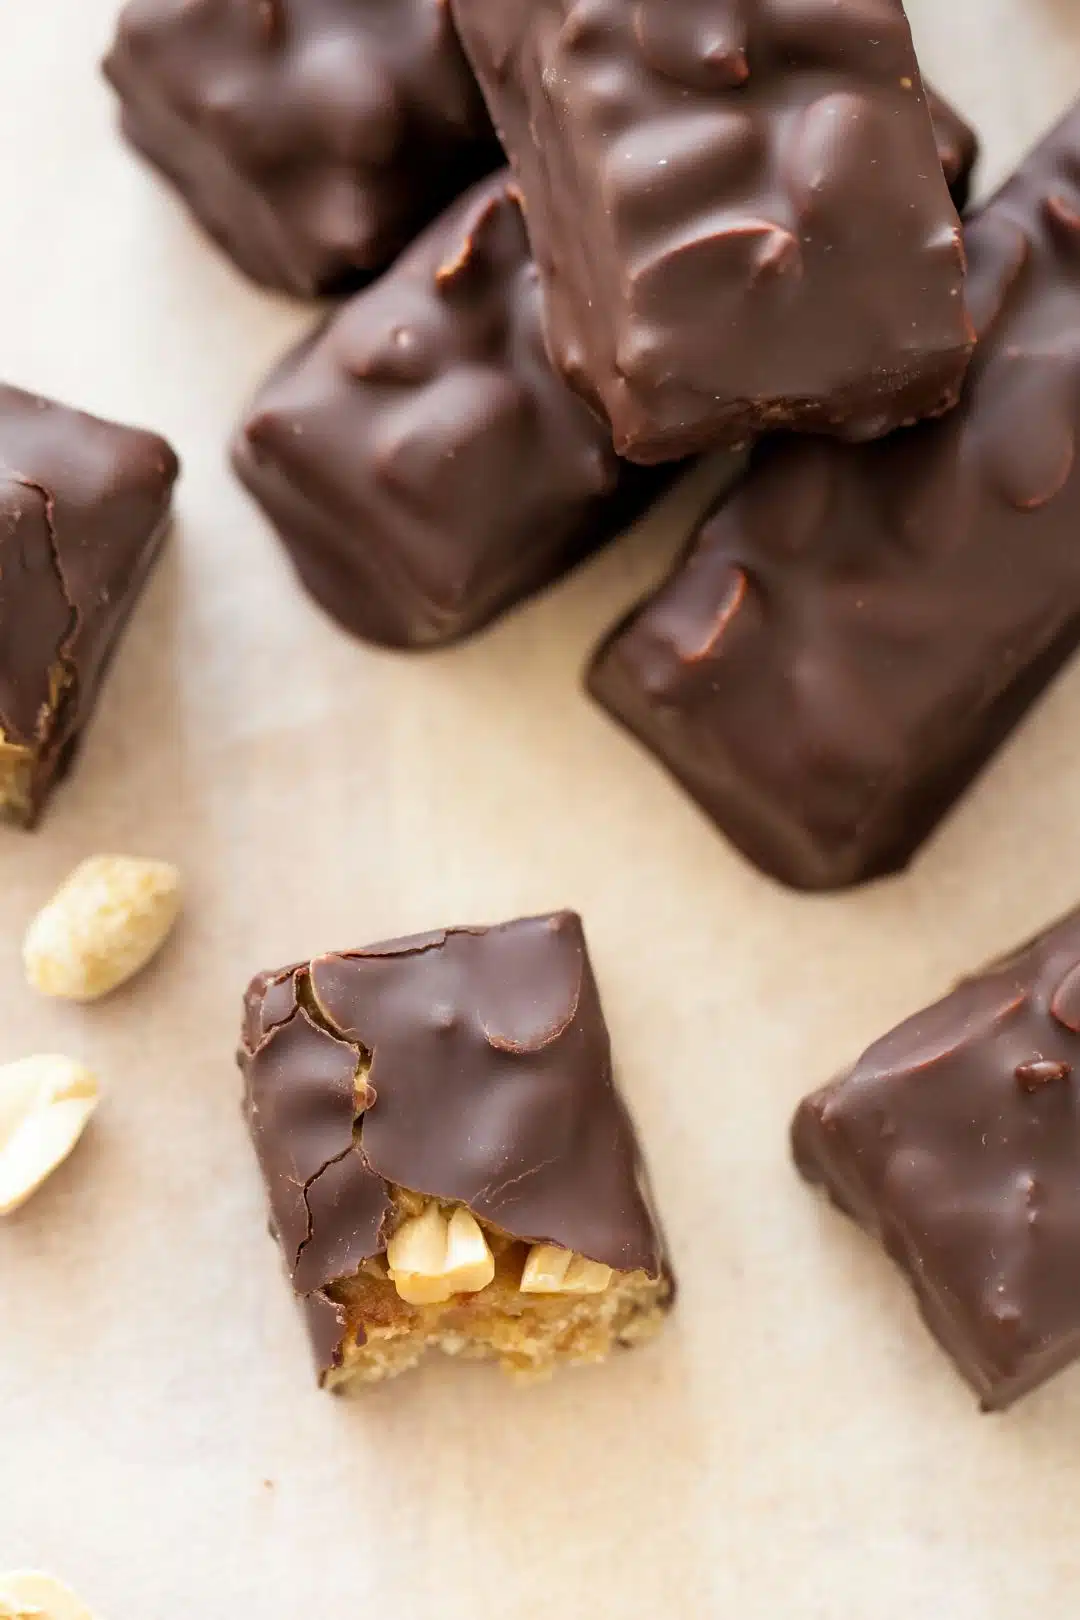 Keto Snickers